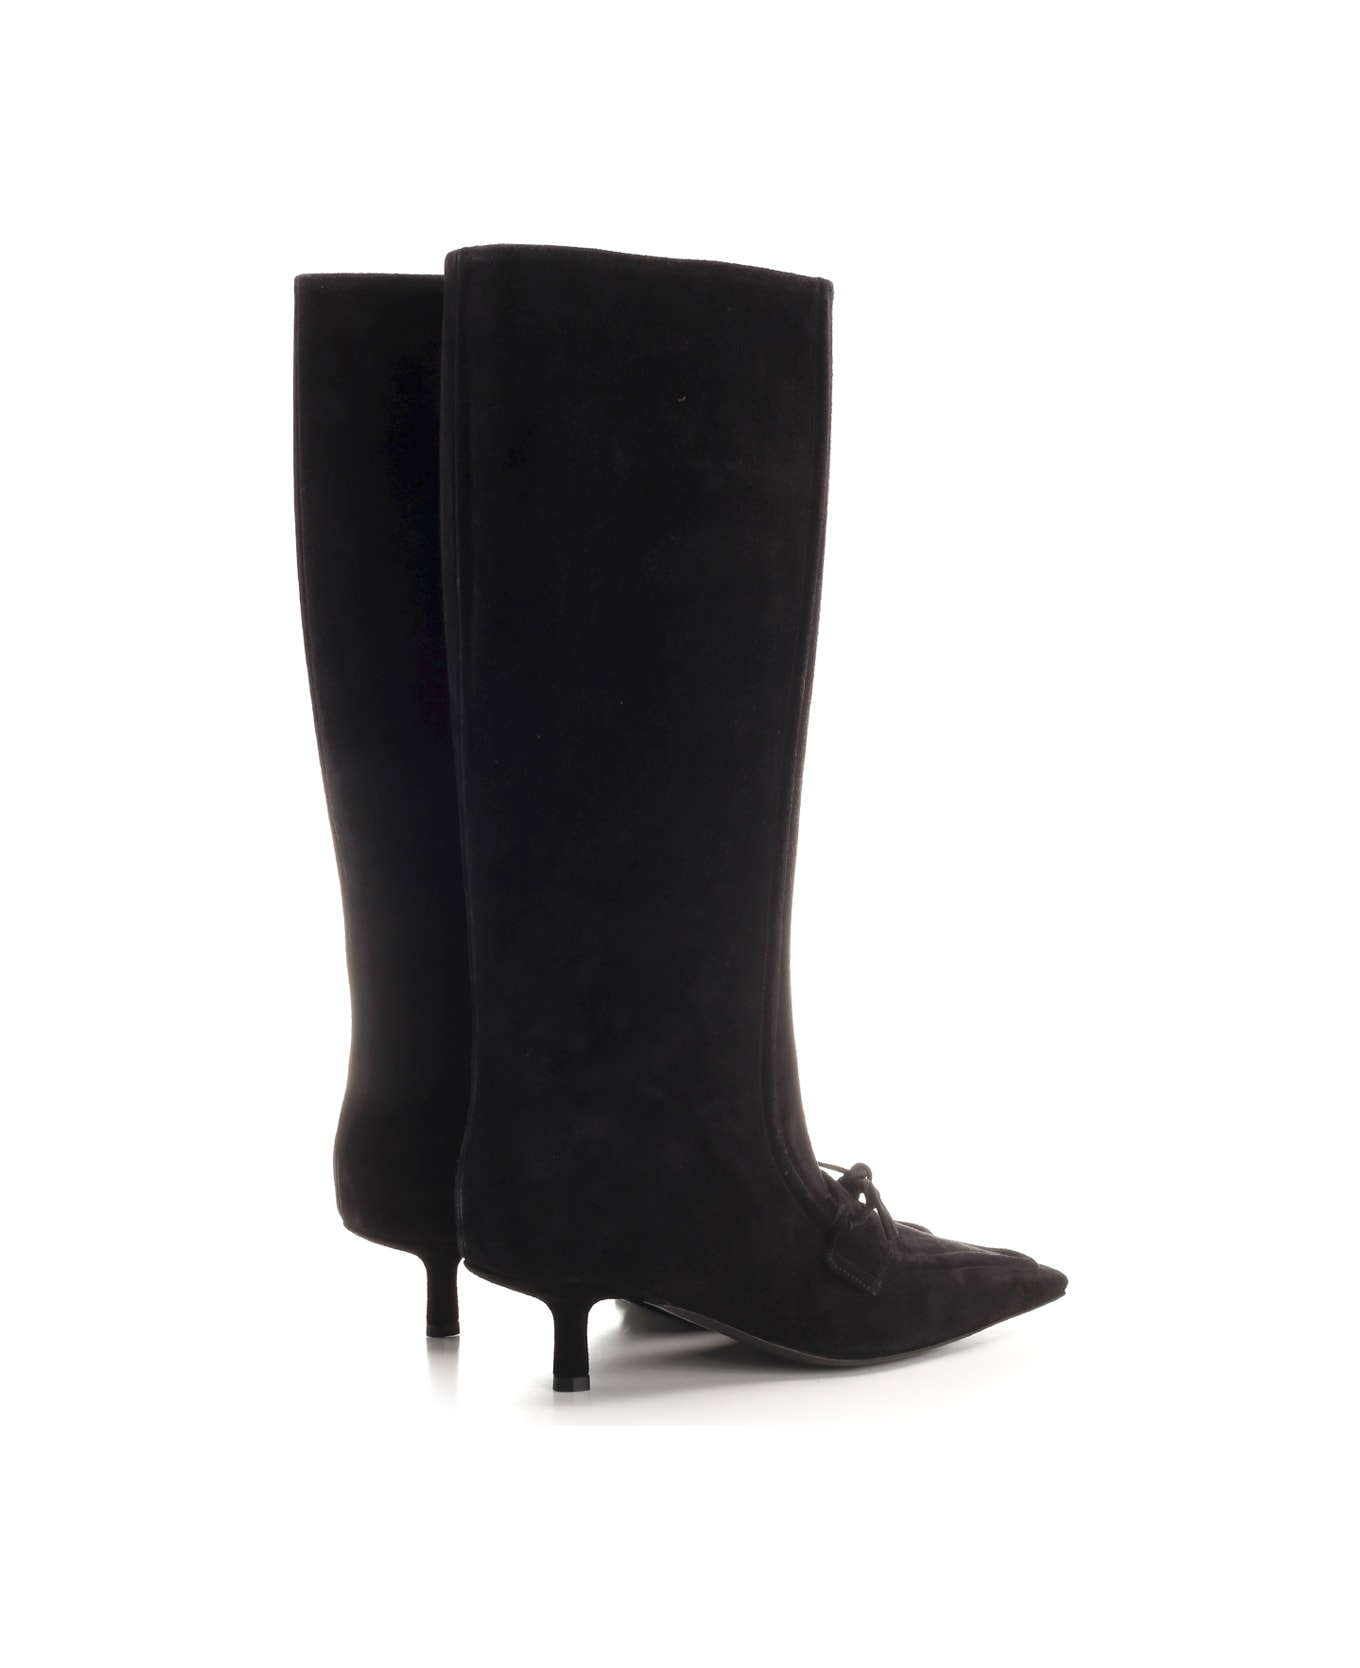 Burberry 'storm' Black Suede Boots - BLACK ブーツ